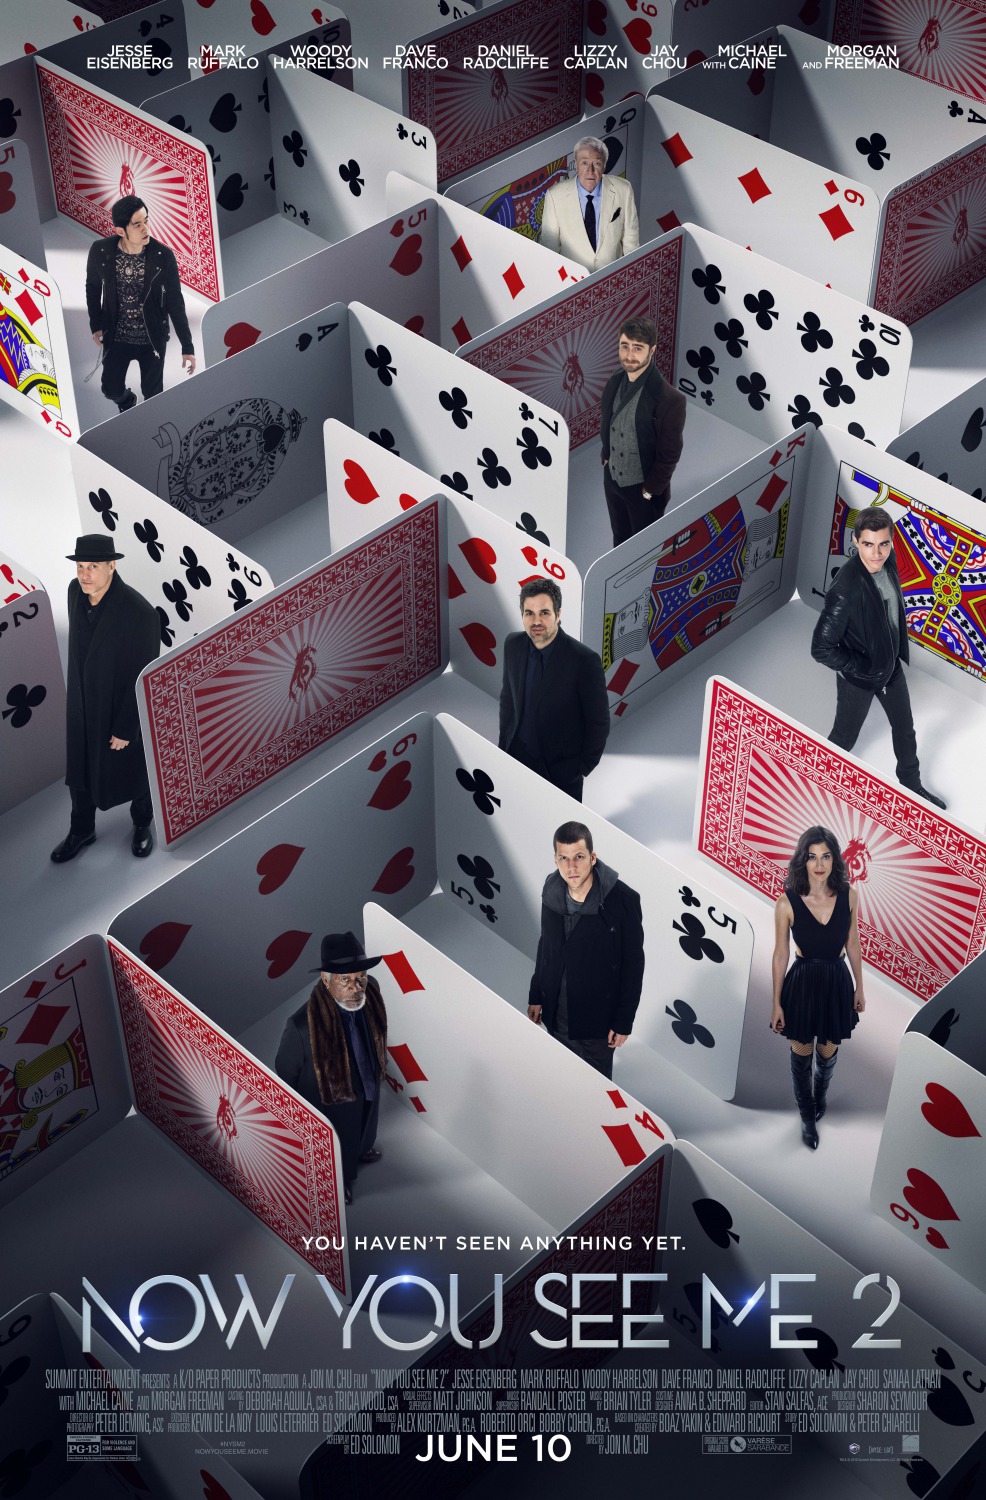 Now You See Me 2 Wallpapers